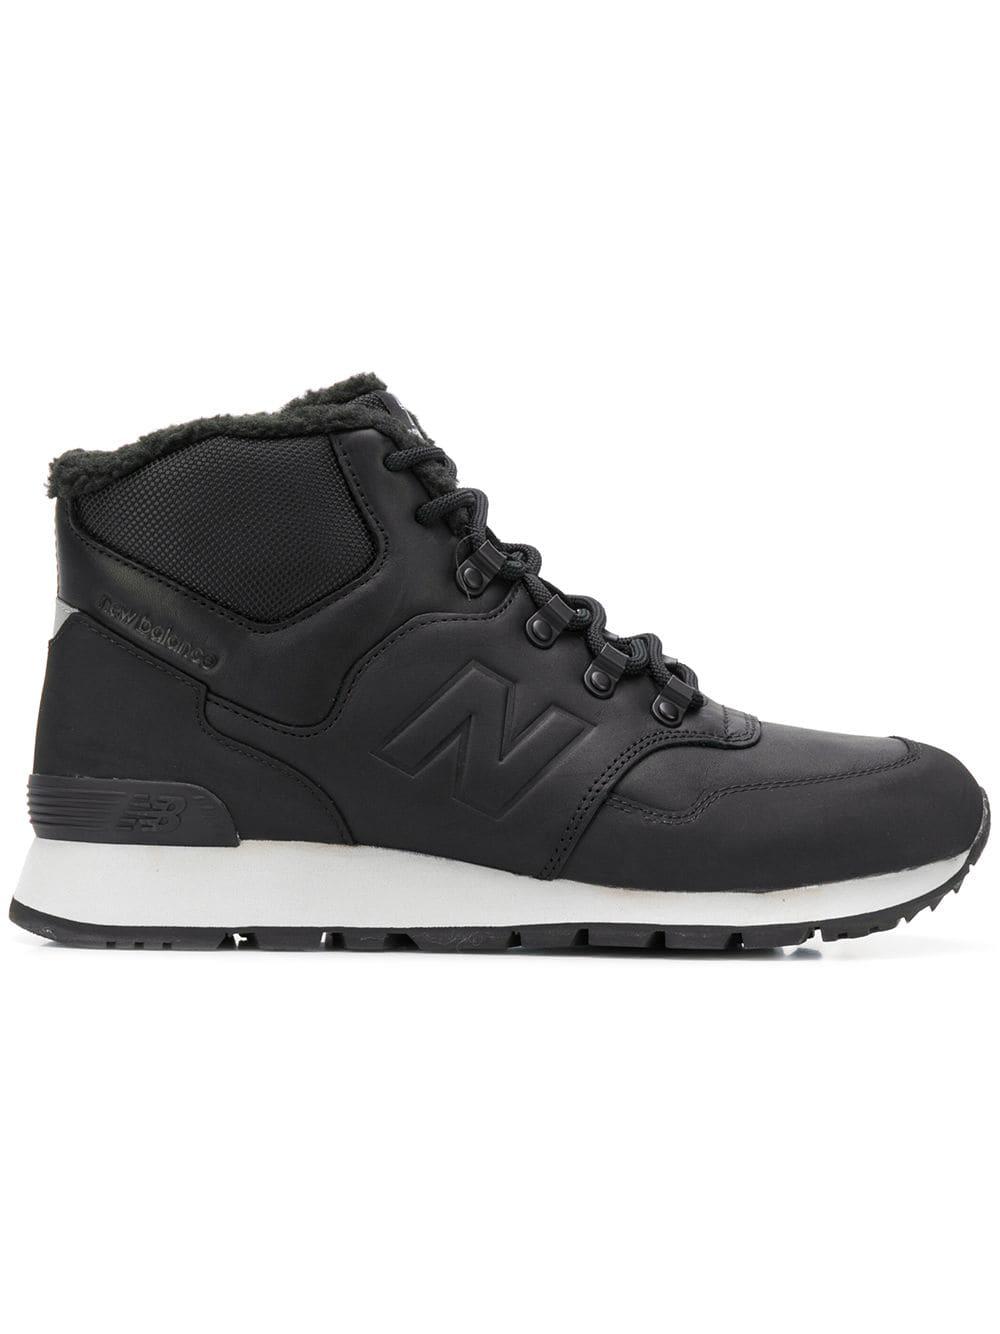 New Balance Rubber 755 Trail Hi-top Sneakers in Black for Men - Lyst